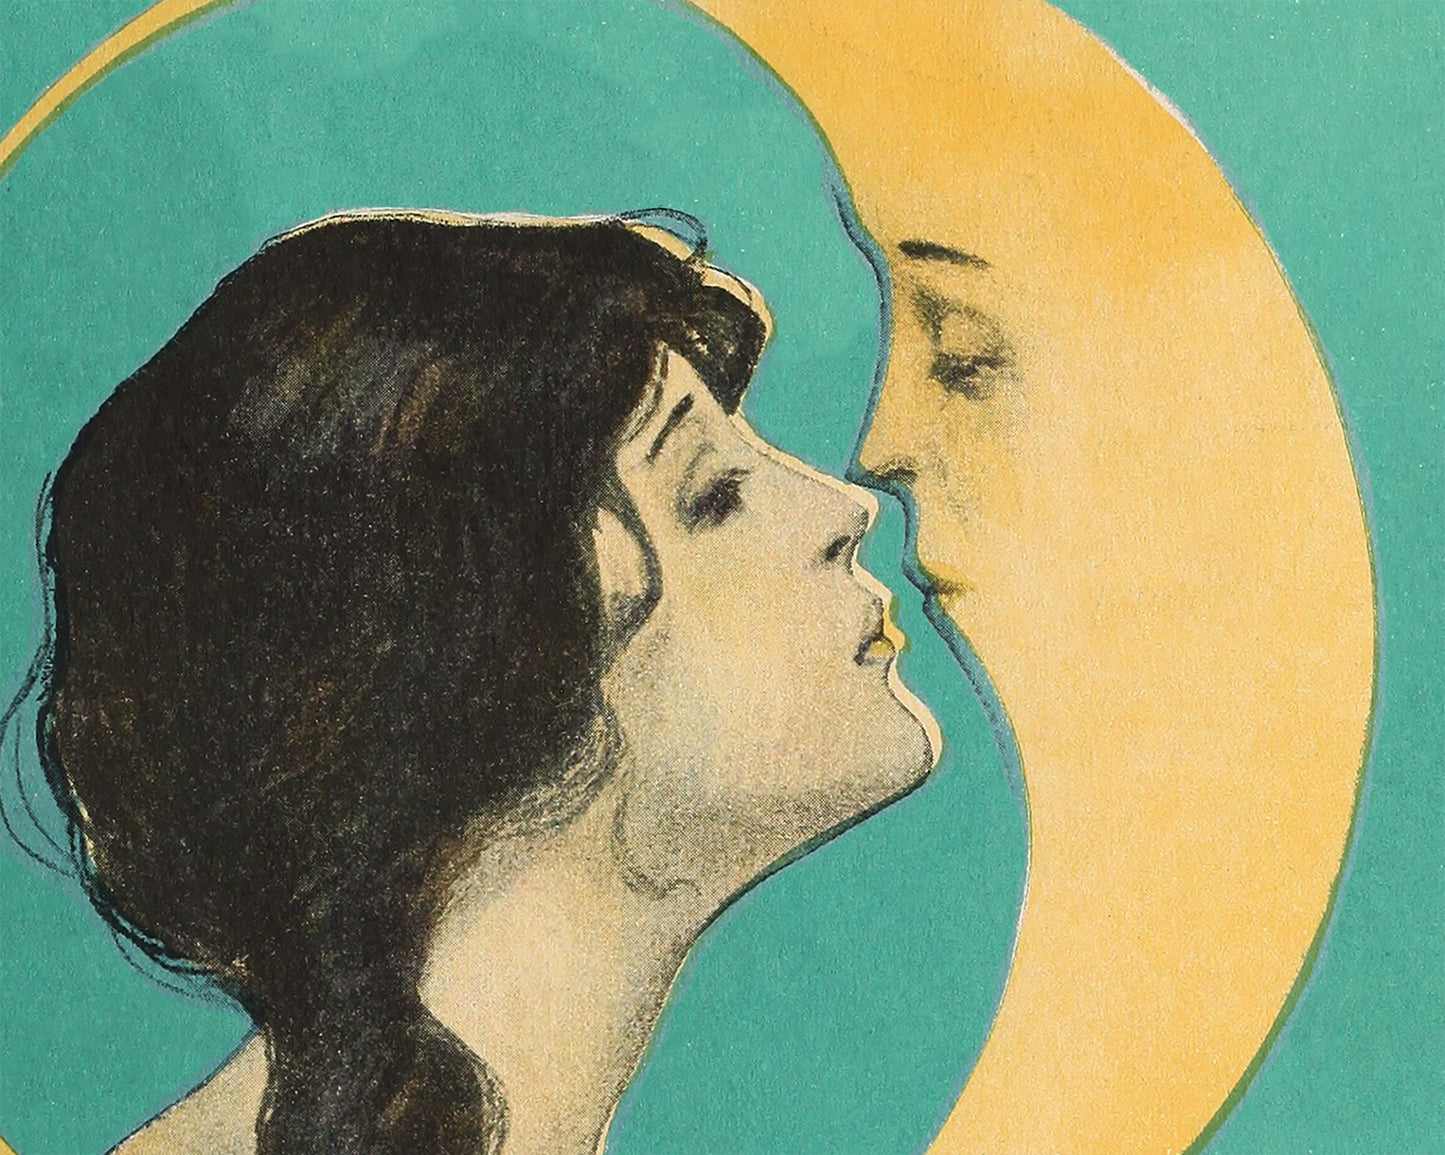 Woman kissing the moon | Vintage love and Valentine | Antique man in the moon | Celestial wall art | Old Dixie moon | Modern Vintage decor